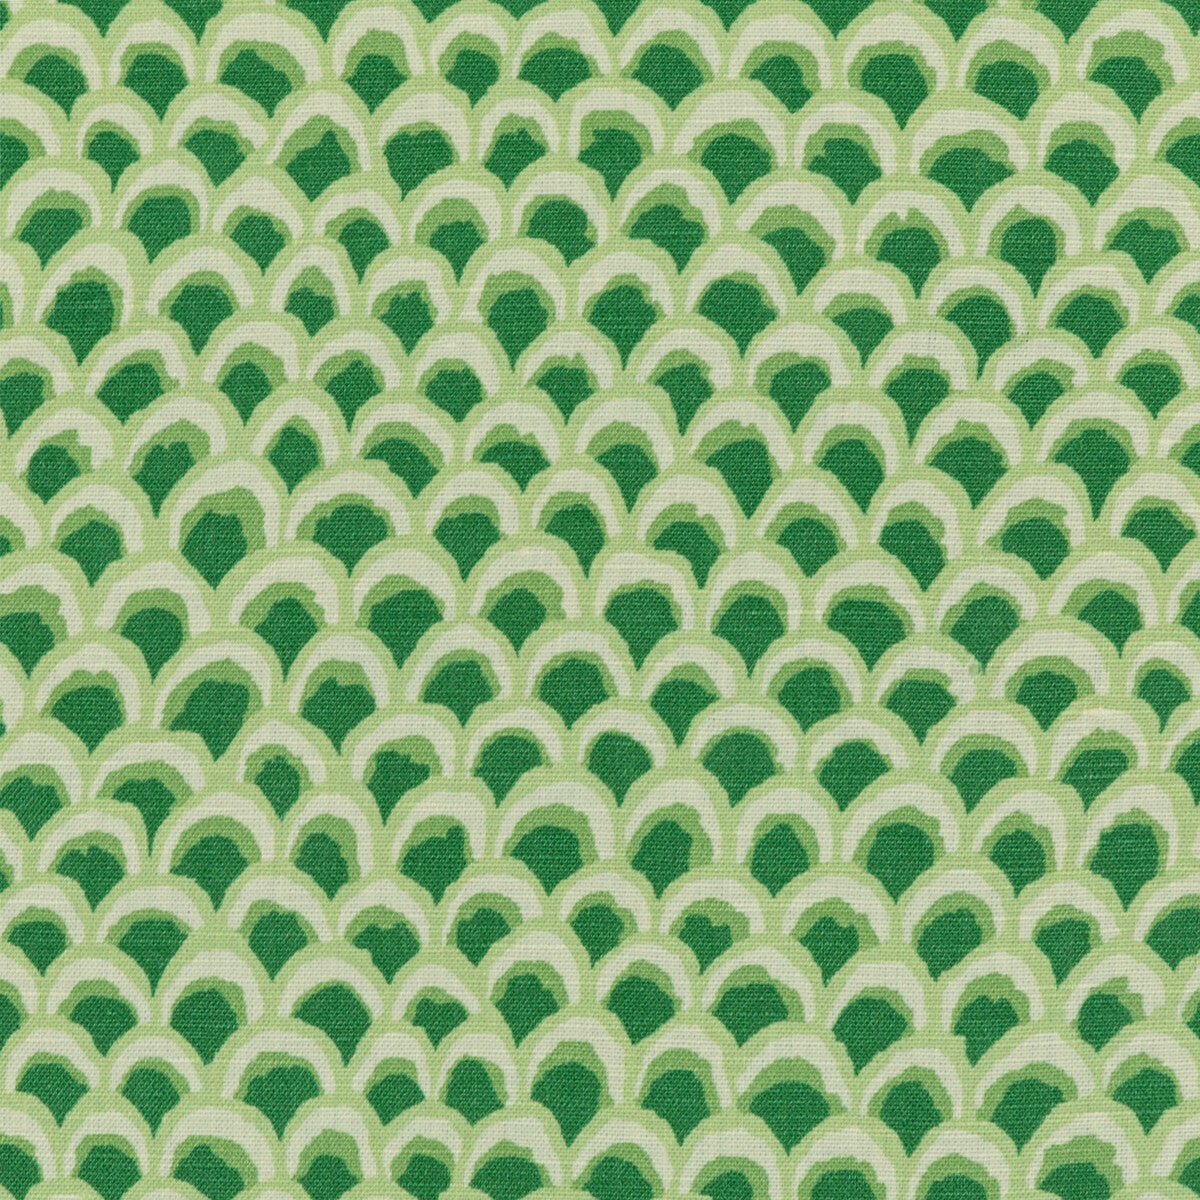 Pave II Print fabric in green color - pattern 8020126.3.0 - by Brunschwig &amp; Fils in the Louverne collection